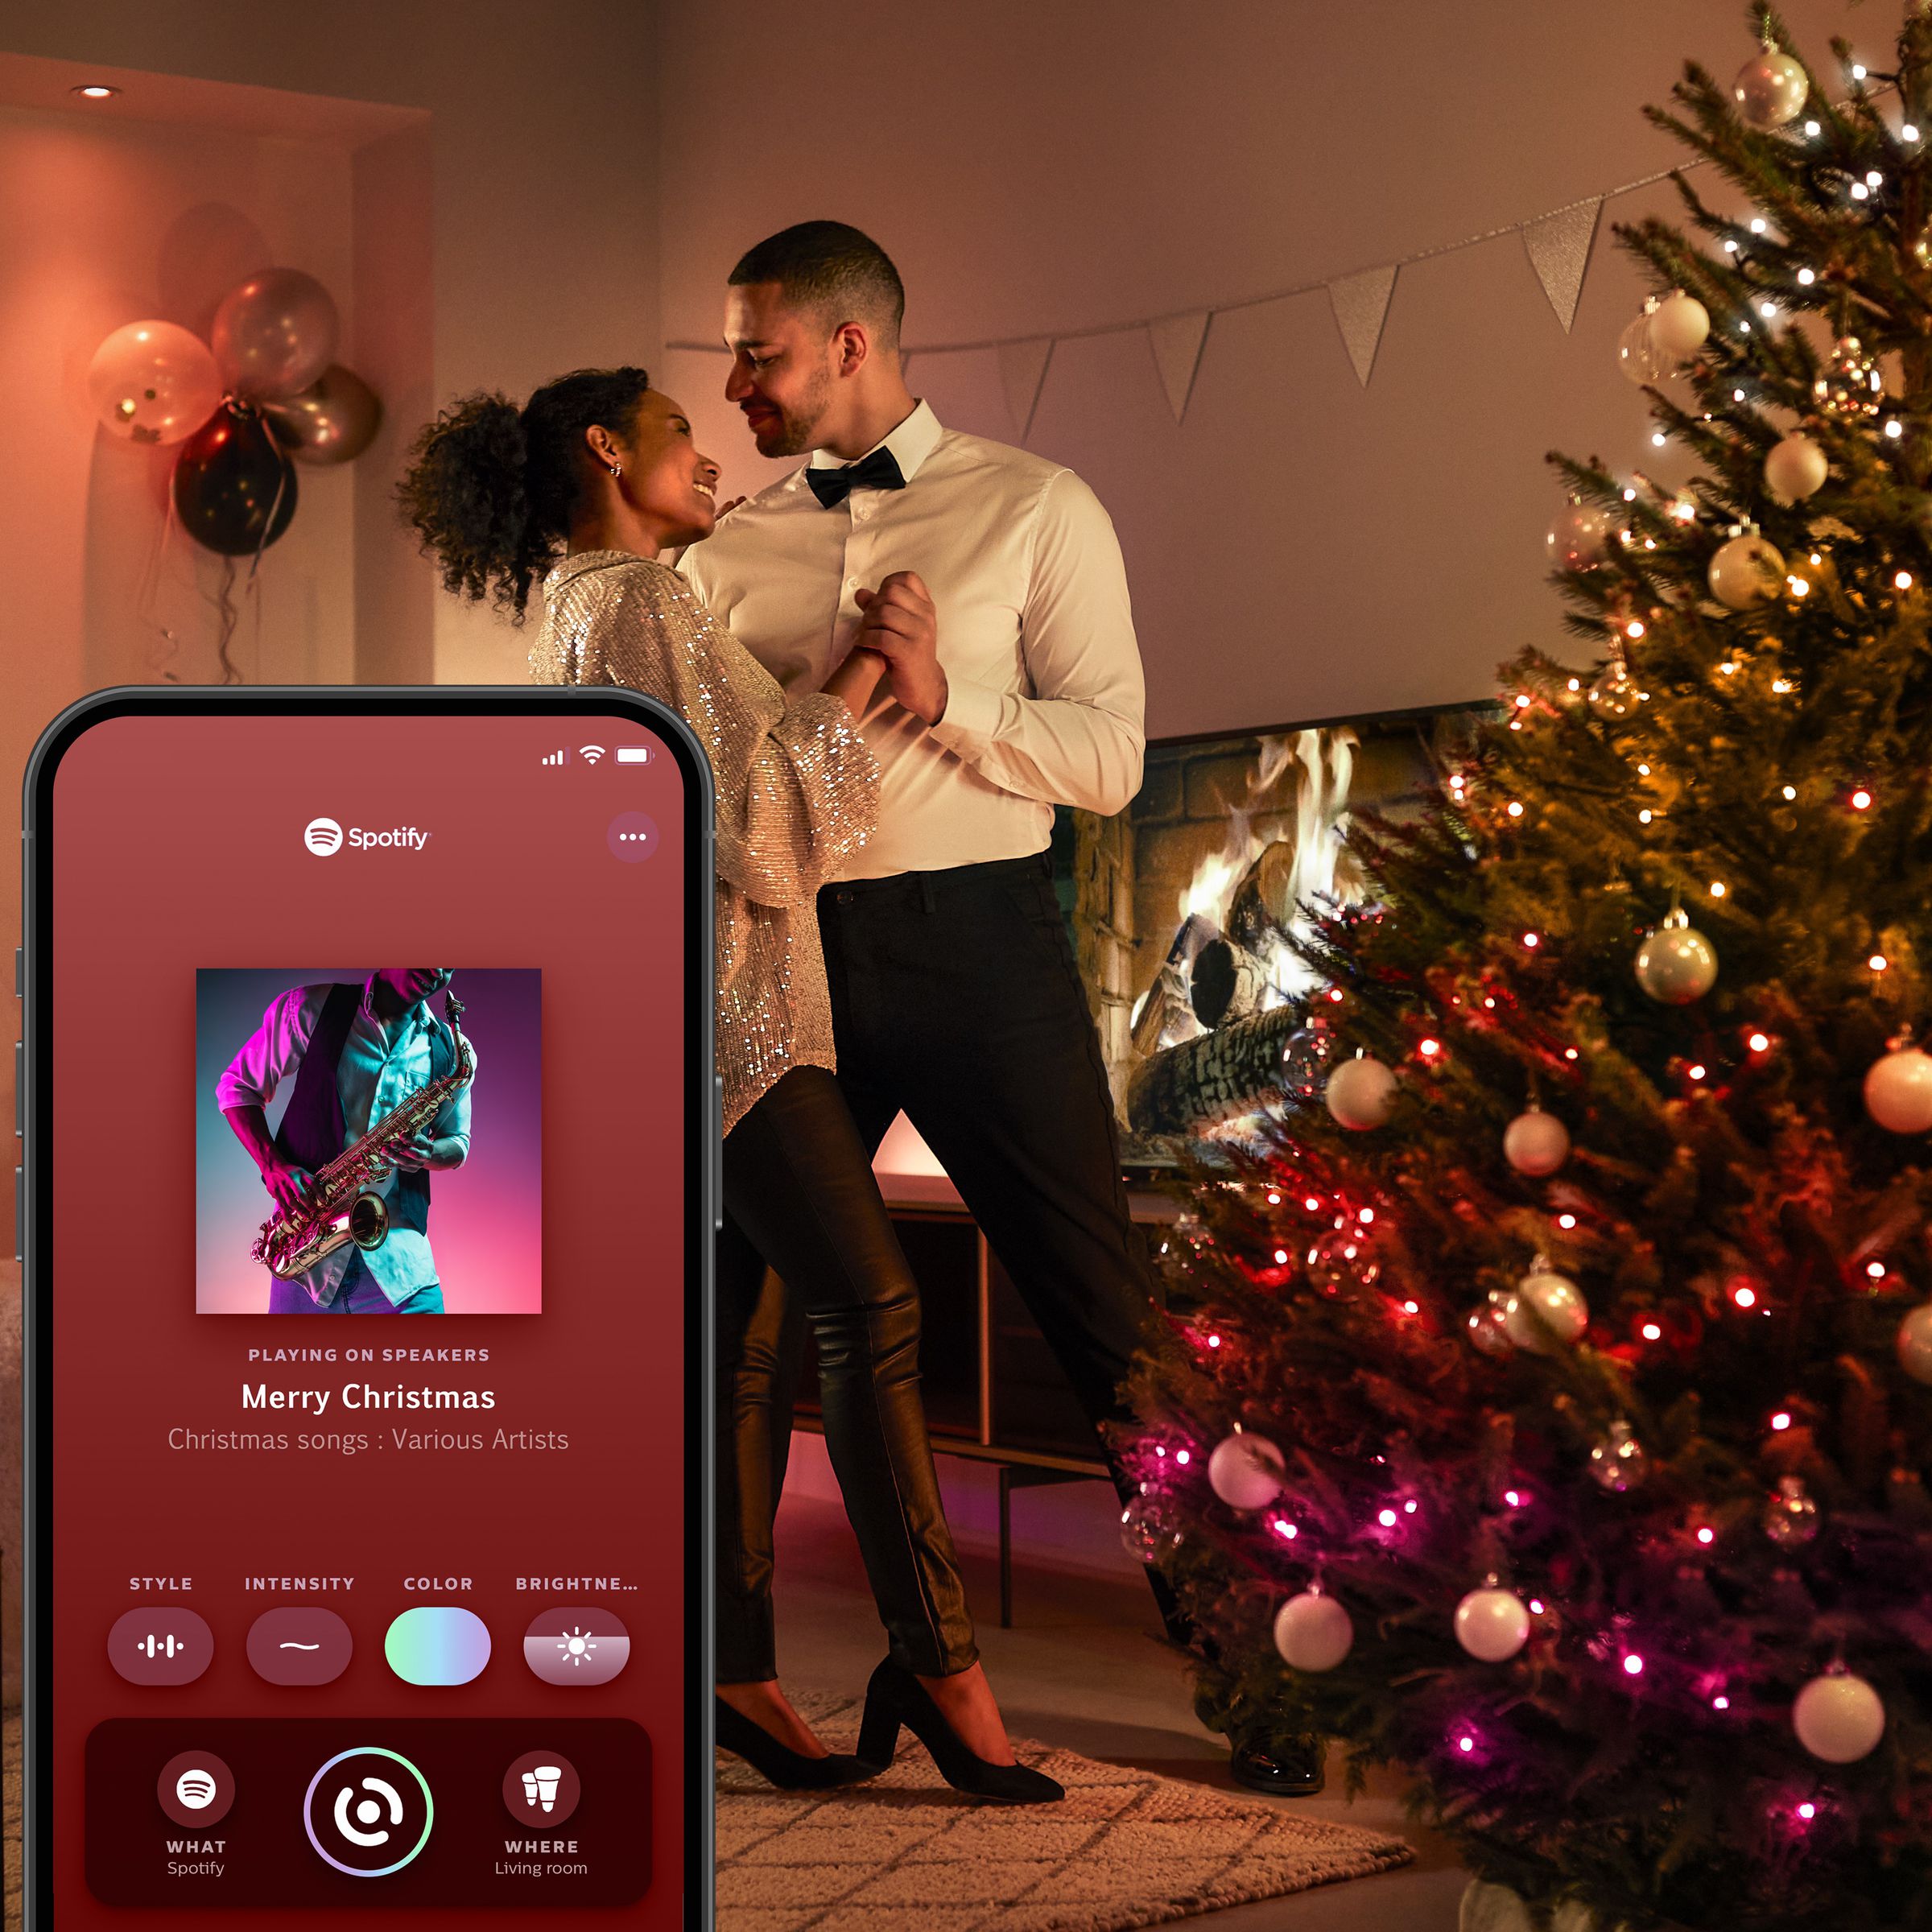 The new string lights work with the Hue app and can sync with other Hue lighting products.